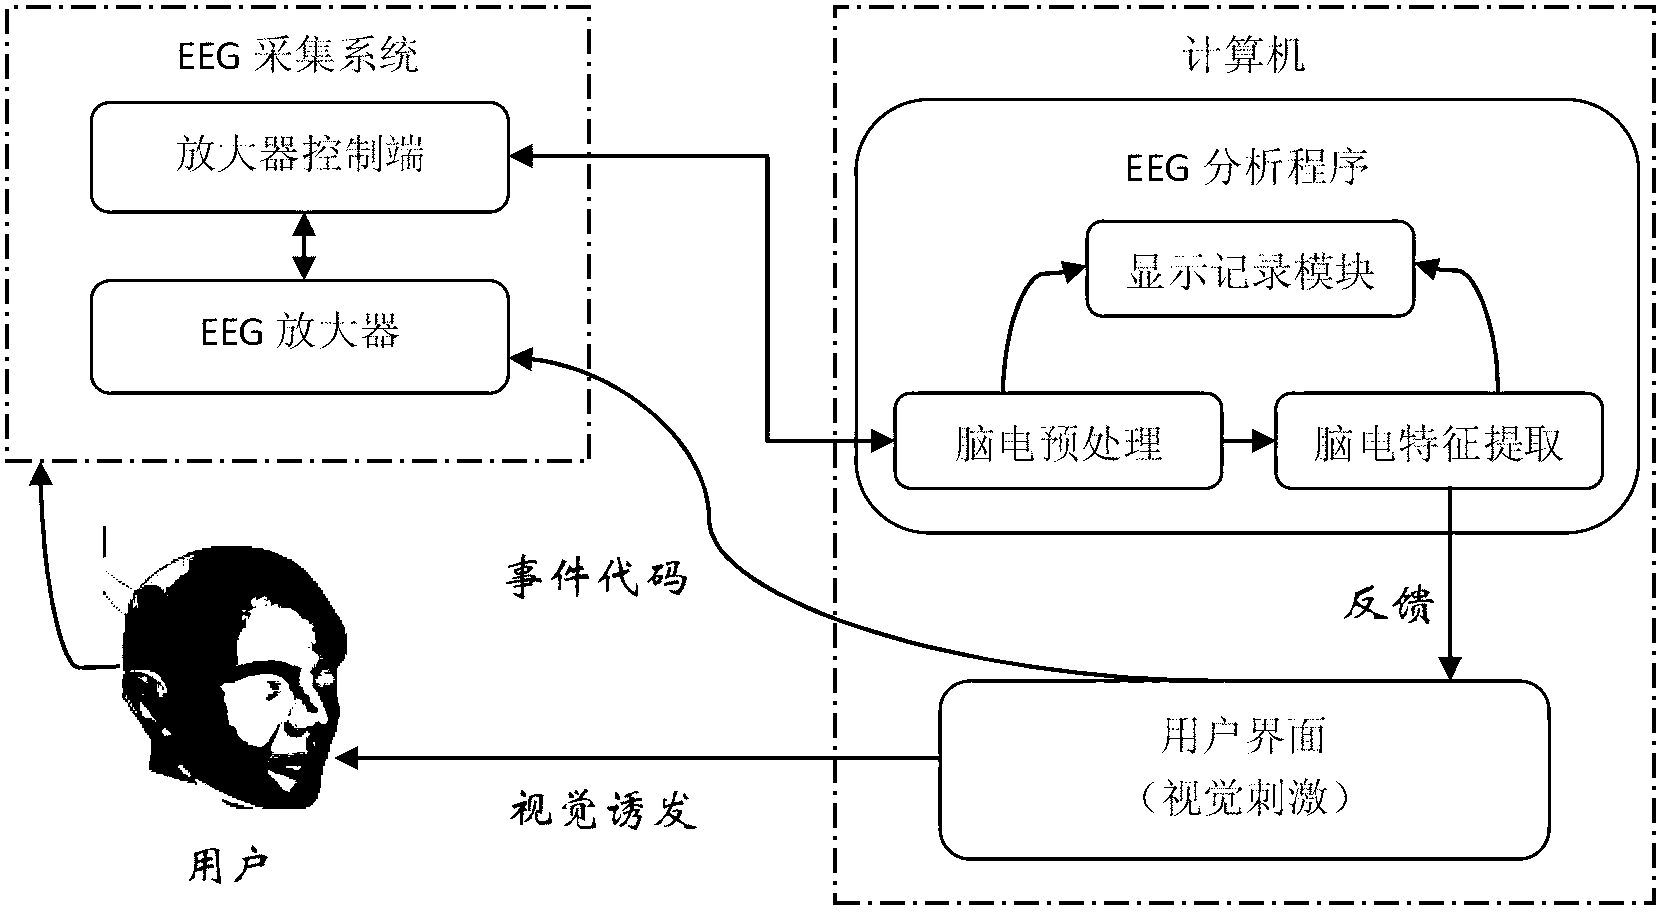 Multi-brain-computer interface method for three characteristics of SSVEP (Steady State Visual Evoked Potential), blocking and P300